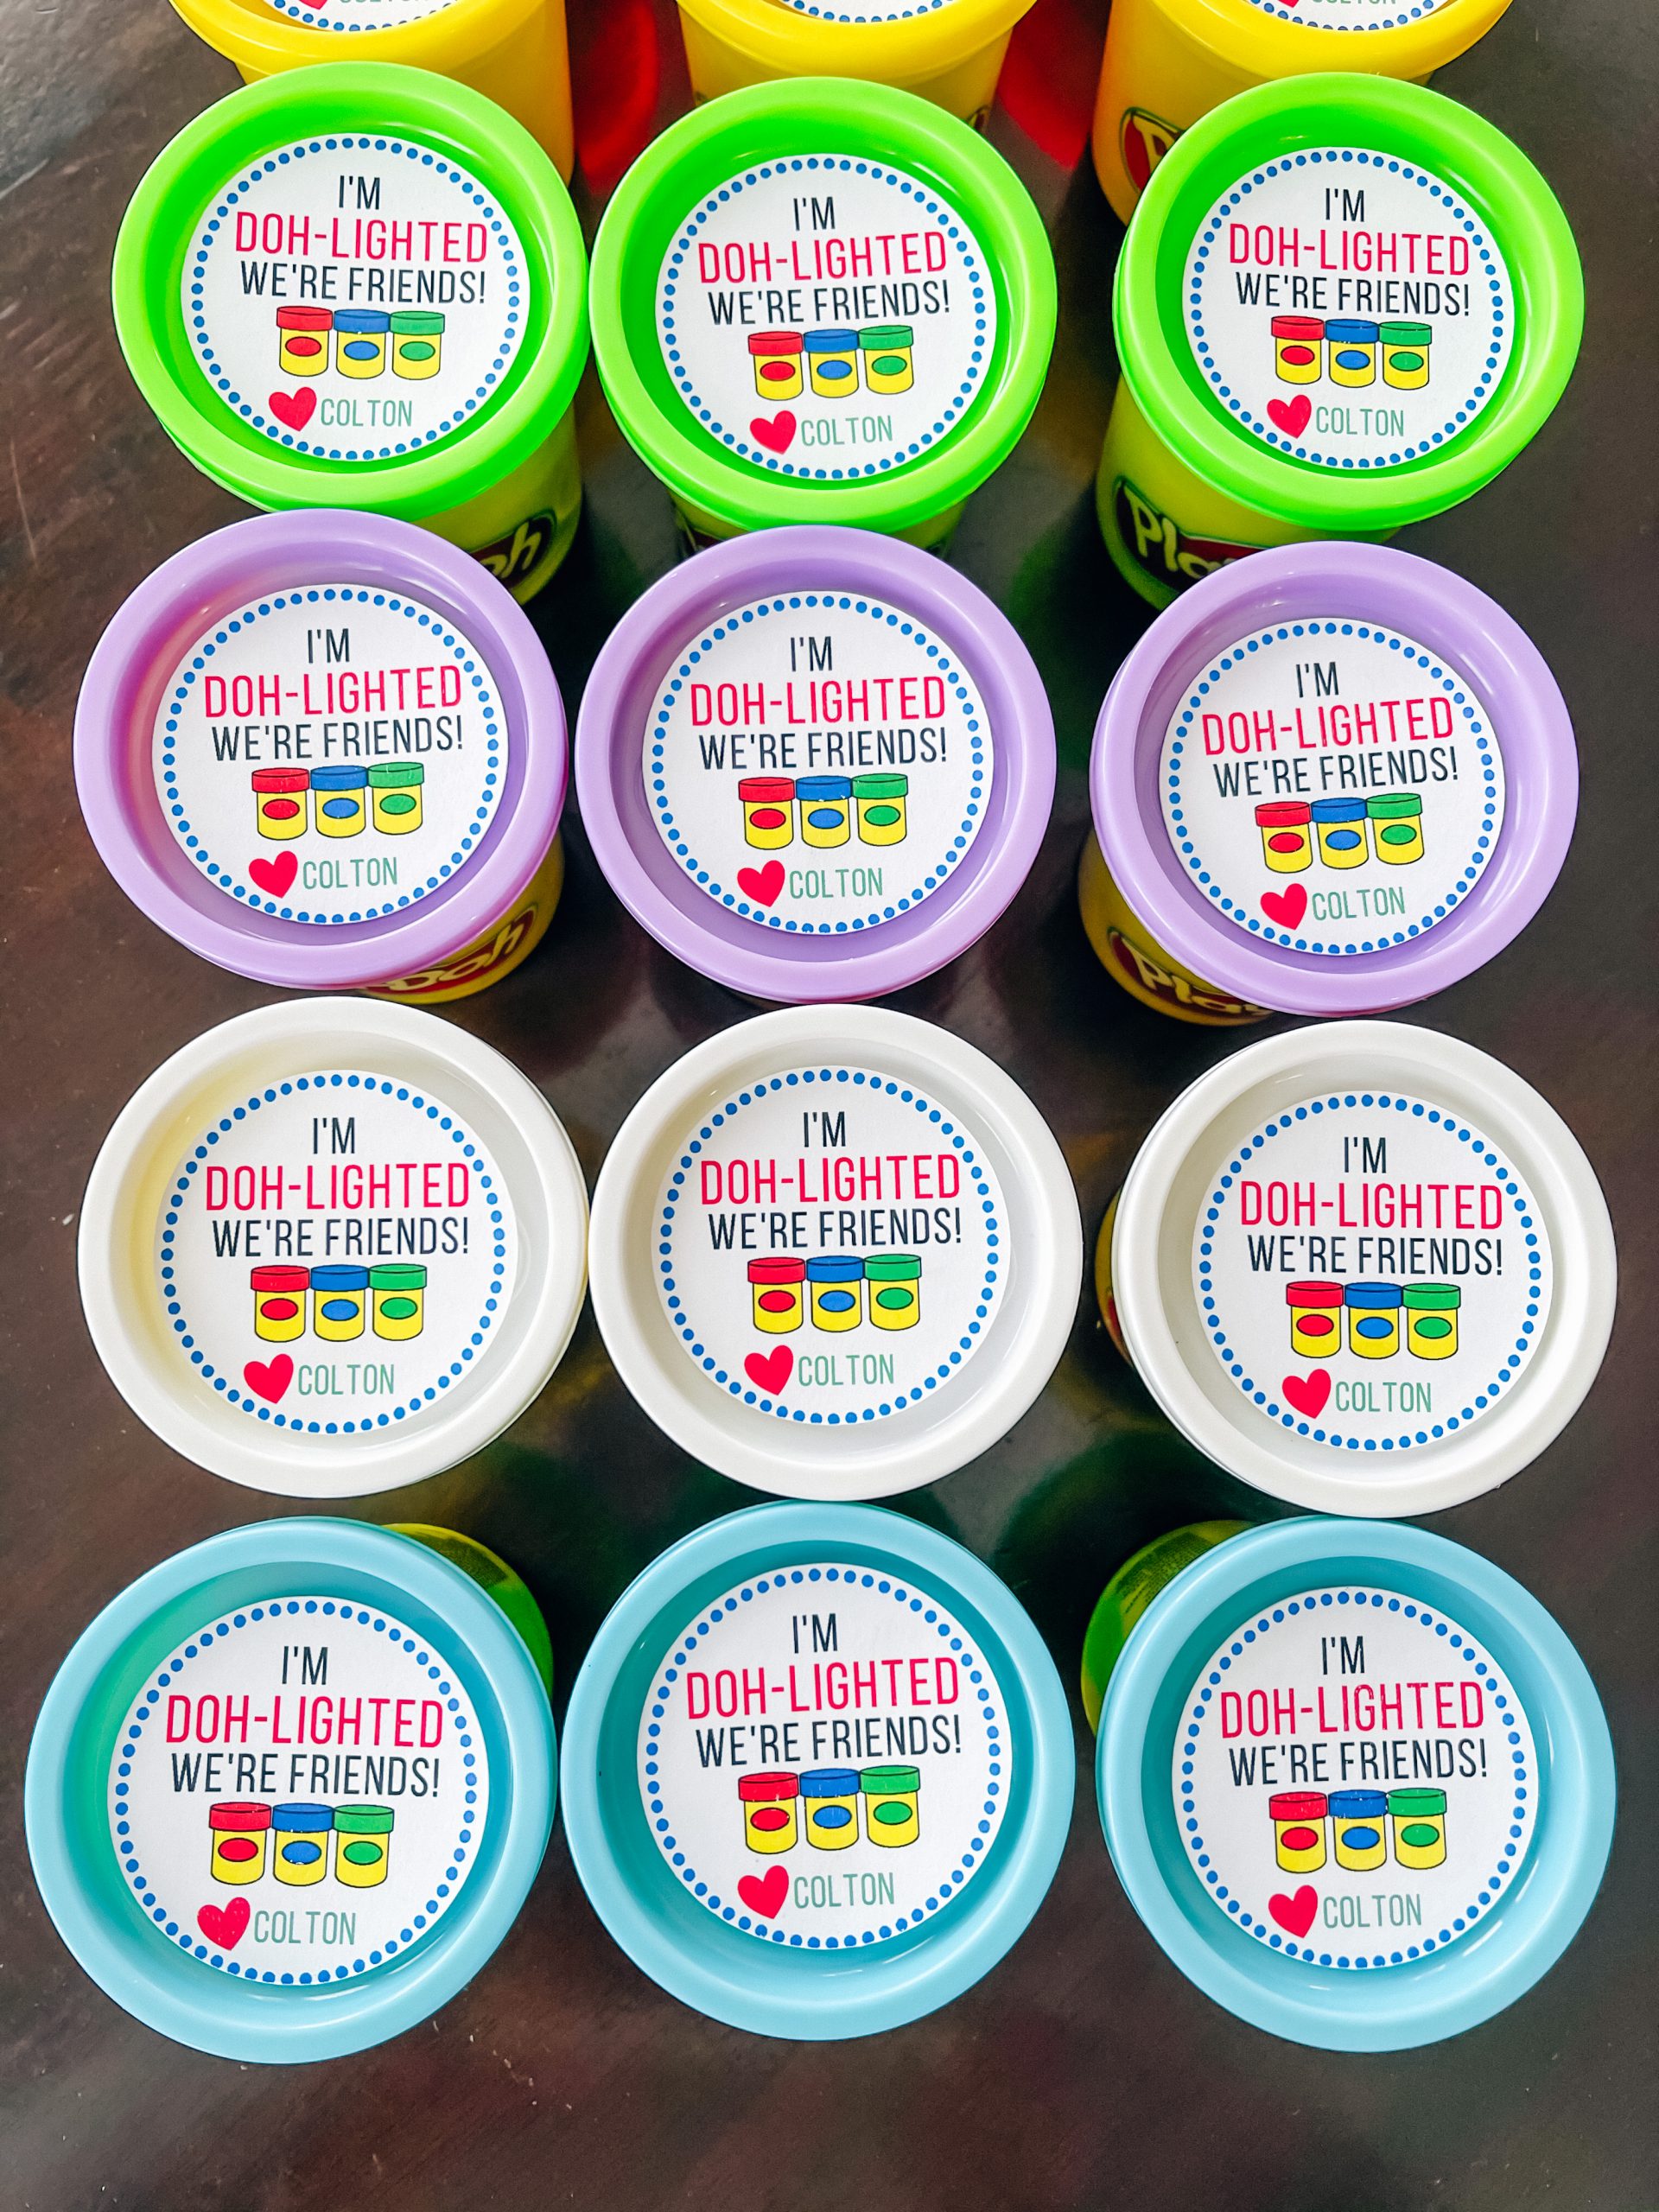 Play-Doh Party Favors - Non-Candy Party Favors - Classroom Party Favors - Play-Doh Labels - Beginner Cricut projects: These Play-Doh party favor labels are fun and easy to make! Free printable included plus Cricut Design Space file to help with cutting! #cricut #playdoh #party